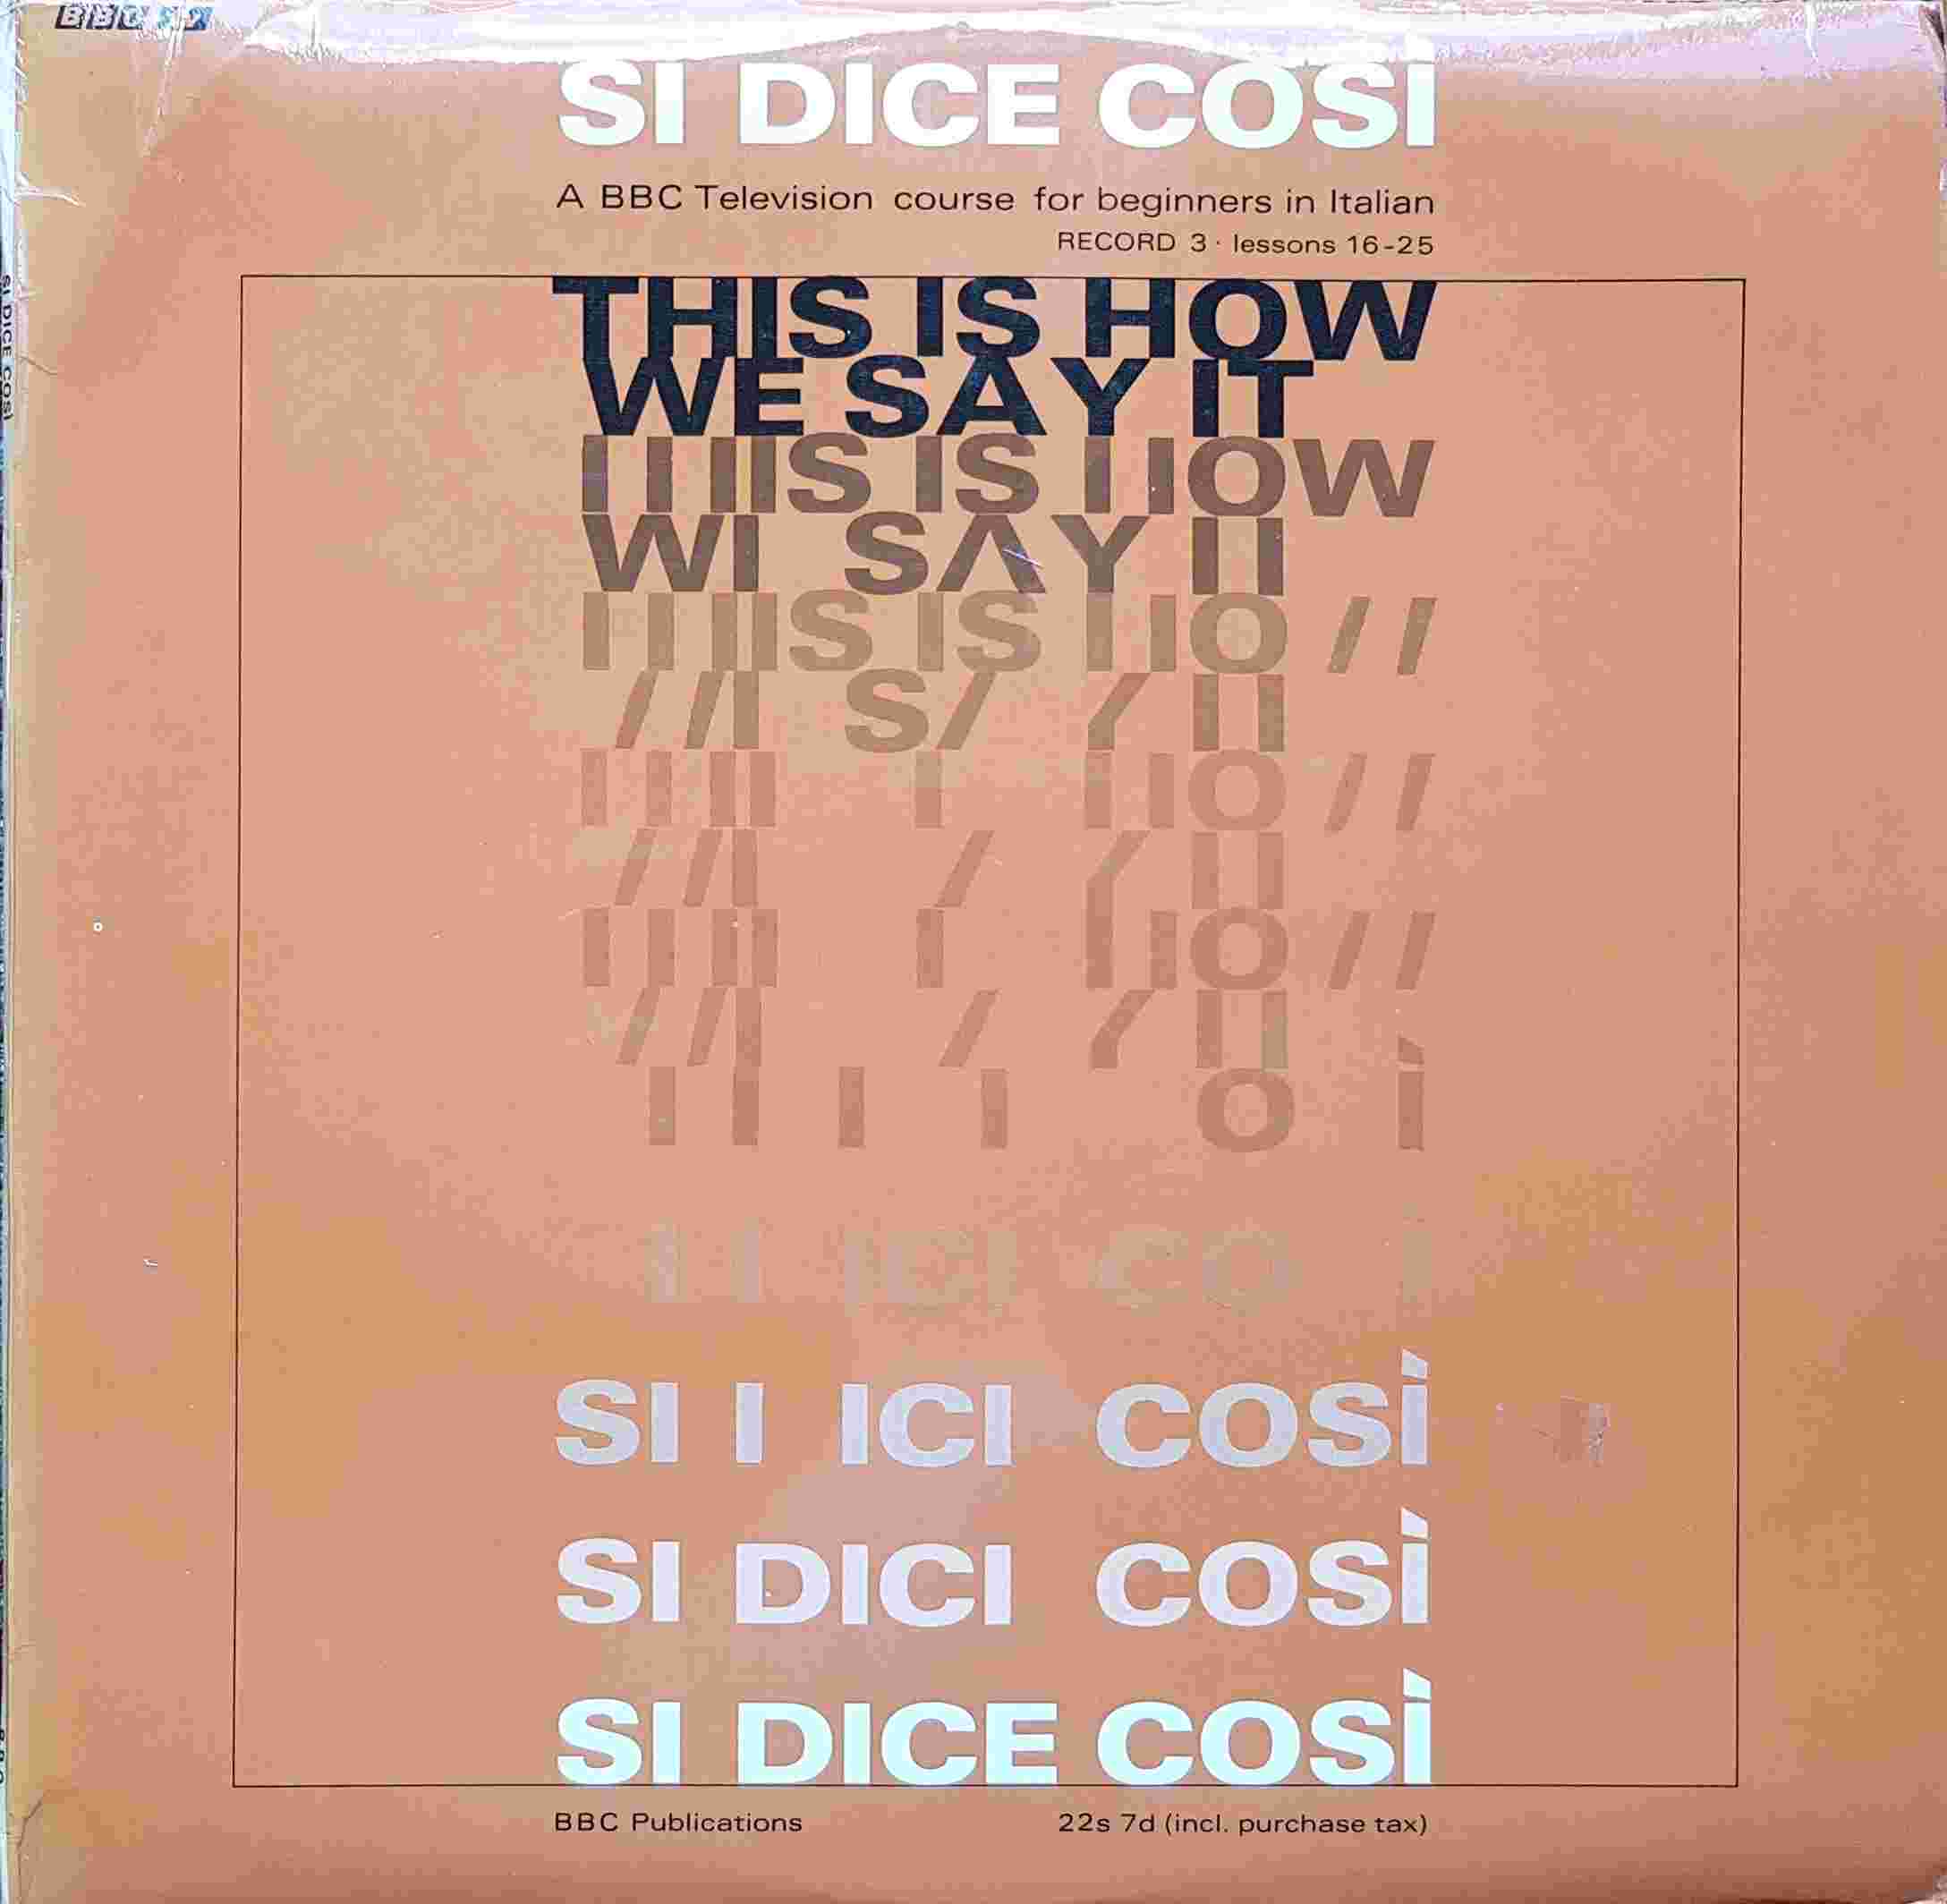 Picture of OP 131/132 Si dice cosi - A BBC Television course for beginners in Italian - Record 3 - Lessons 16 - 25 by artist Joseph Cremona from the BBC albums - Records and Tapes library